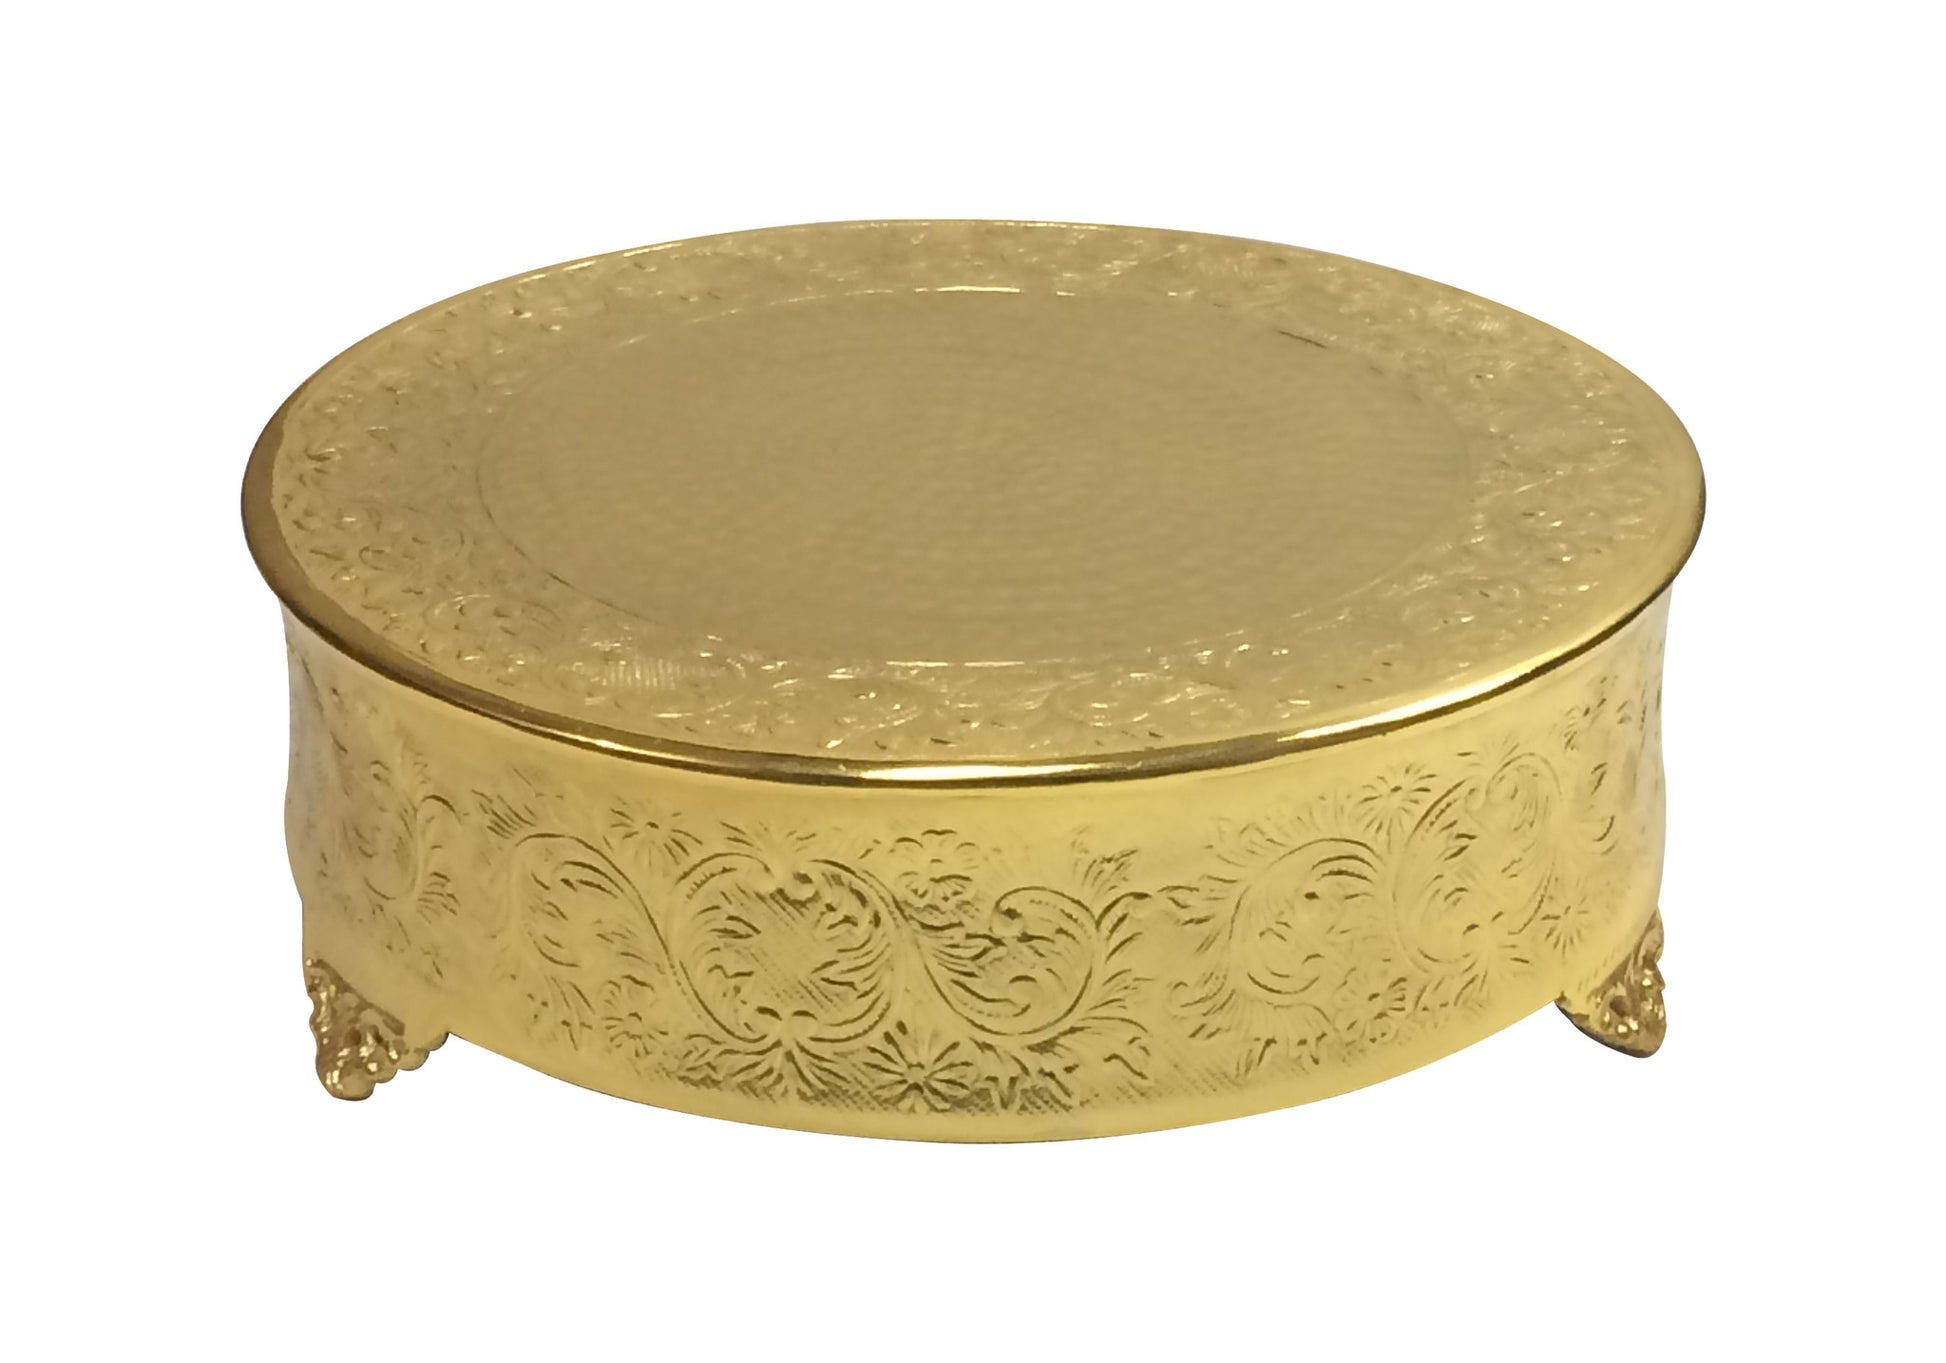 Buy Deco 79 Metal Cake Stand 22 by 10Inch Online at Low Prices in India   Amazonin